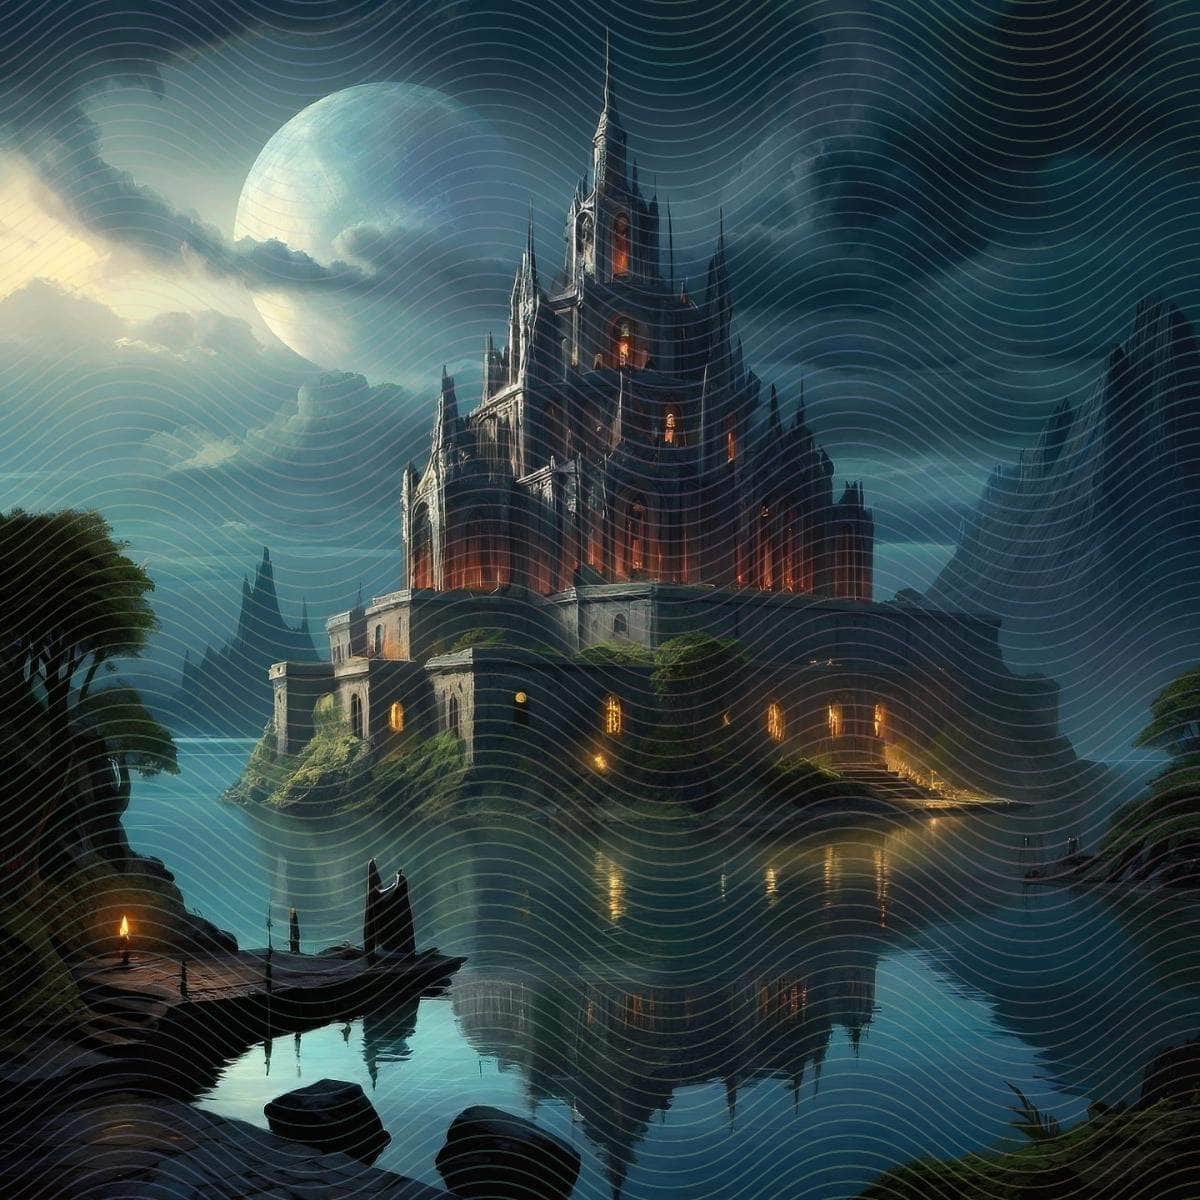 A Lit Fantasy Castle Surrounded By Water